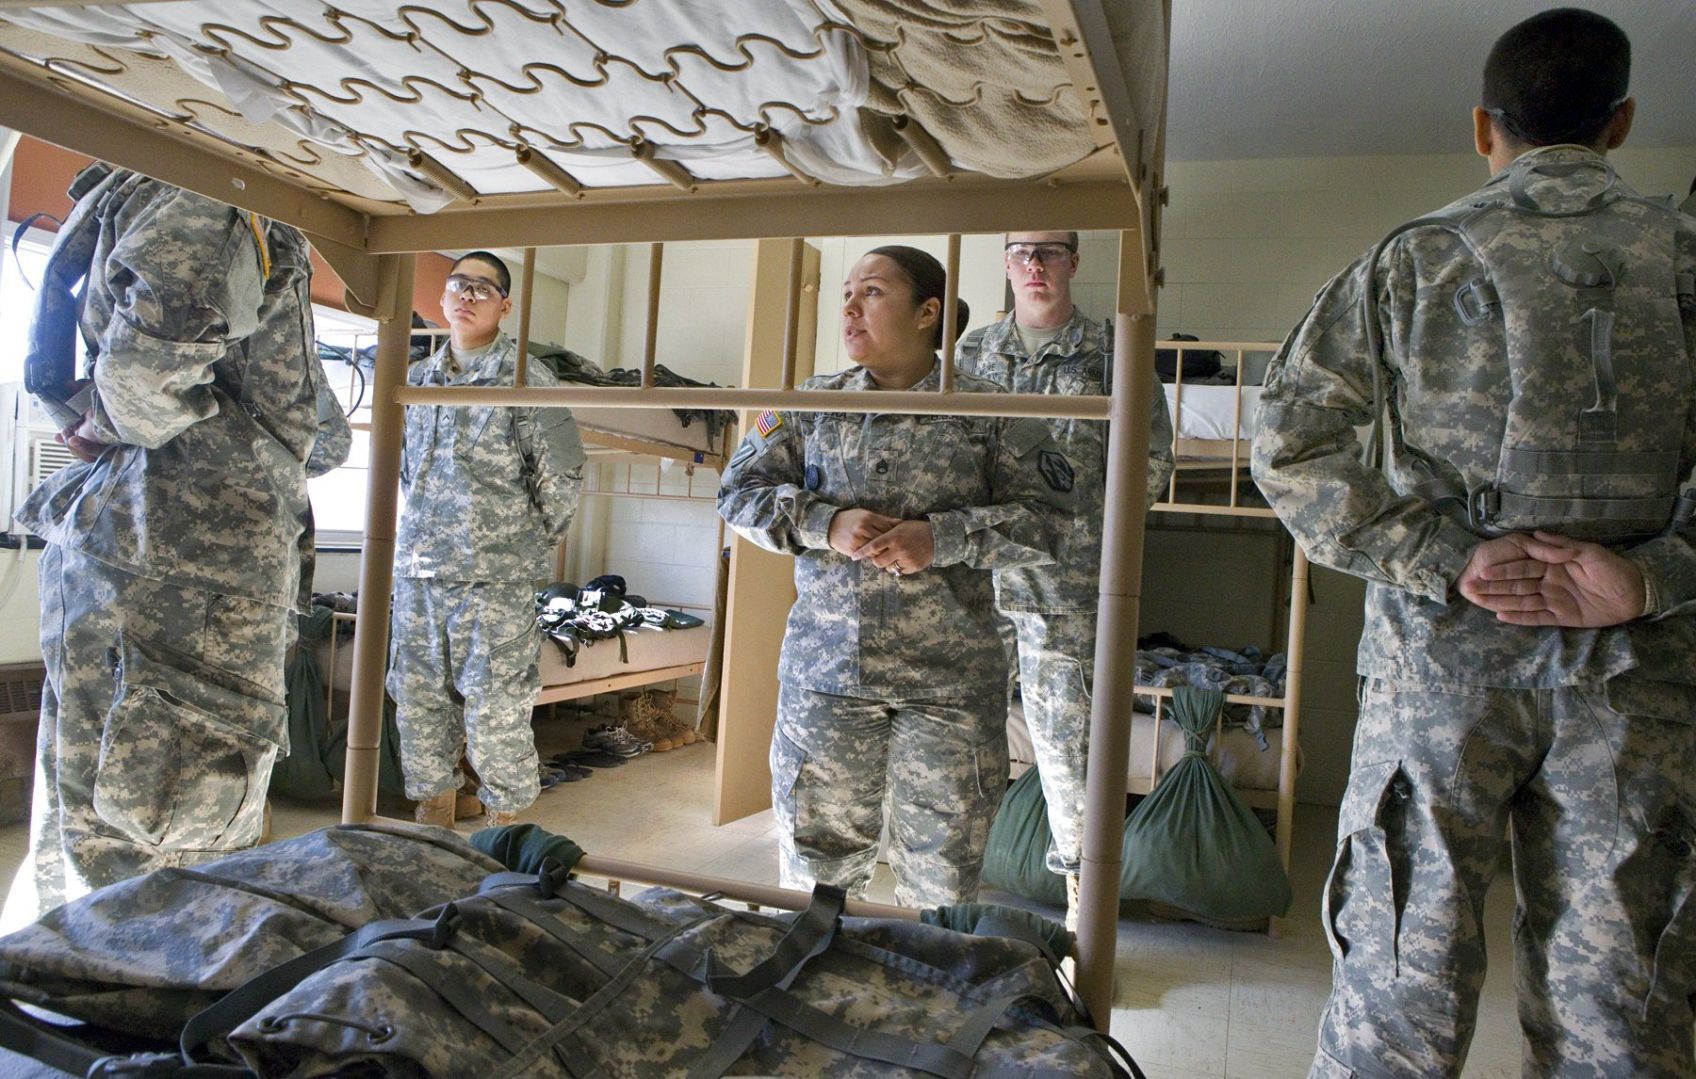 A drill sergeant inspects the barracks image